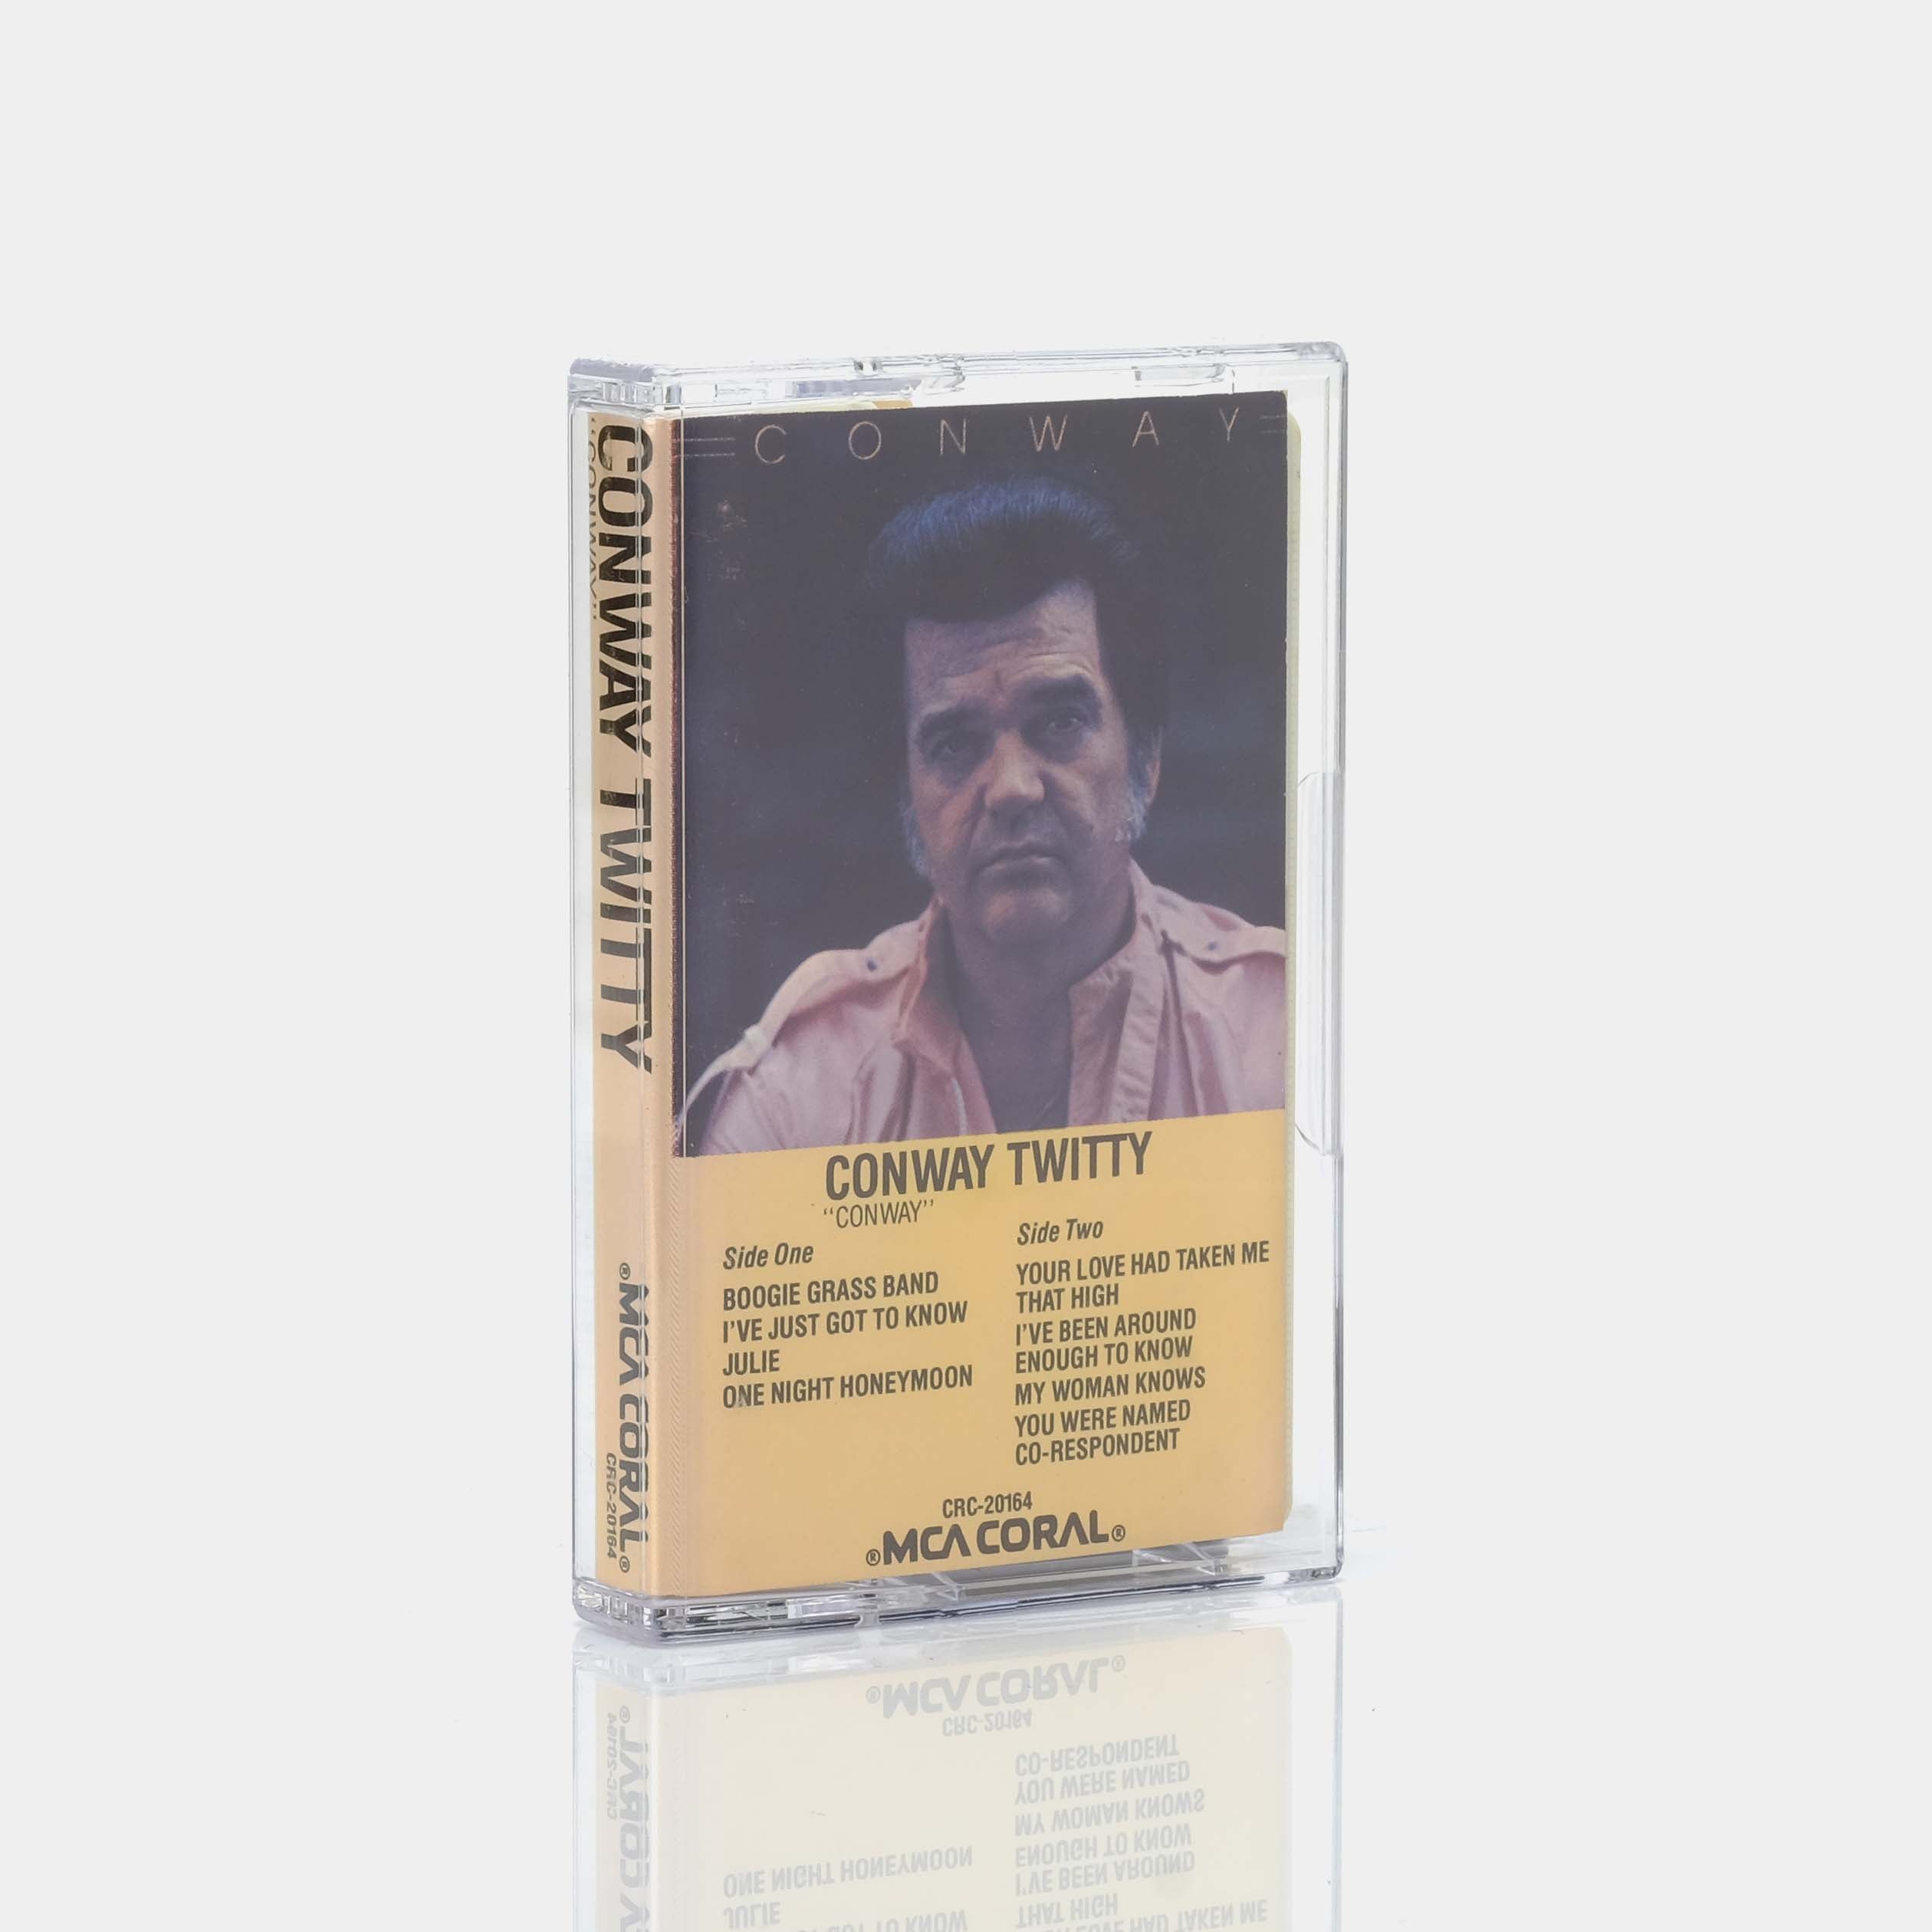 Conway Twitty - Conway Cassette Tape